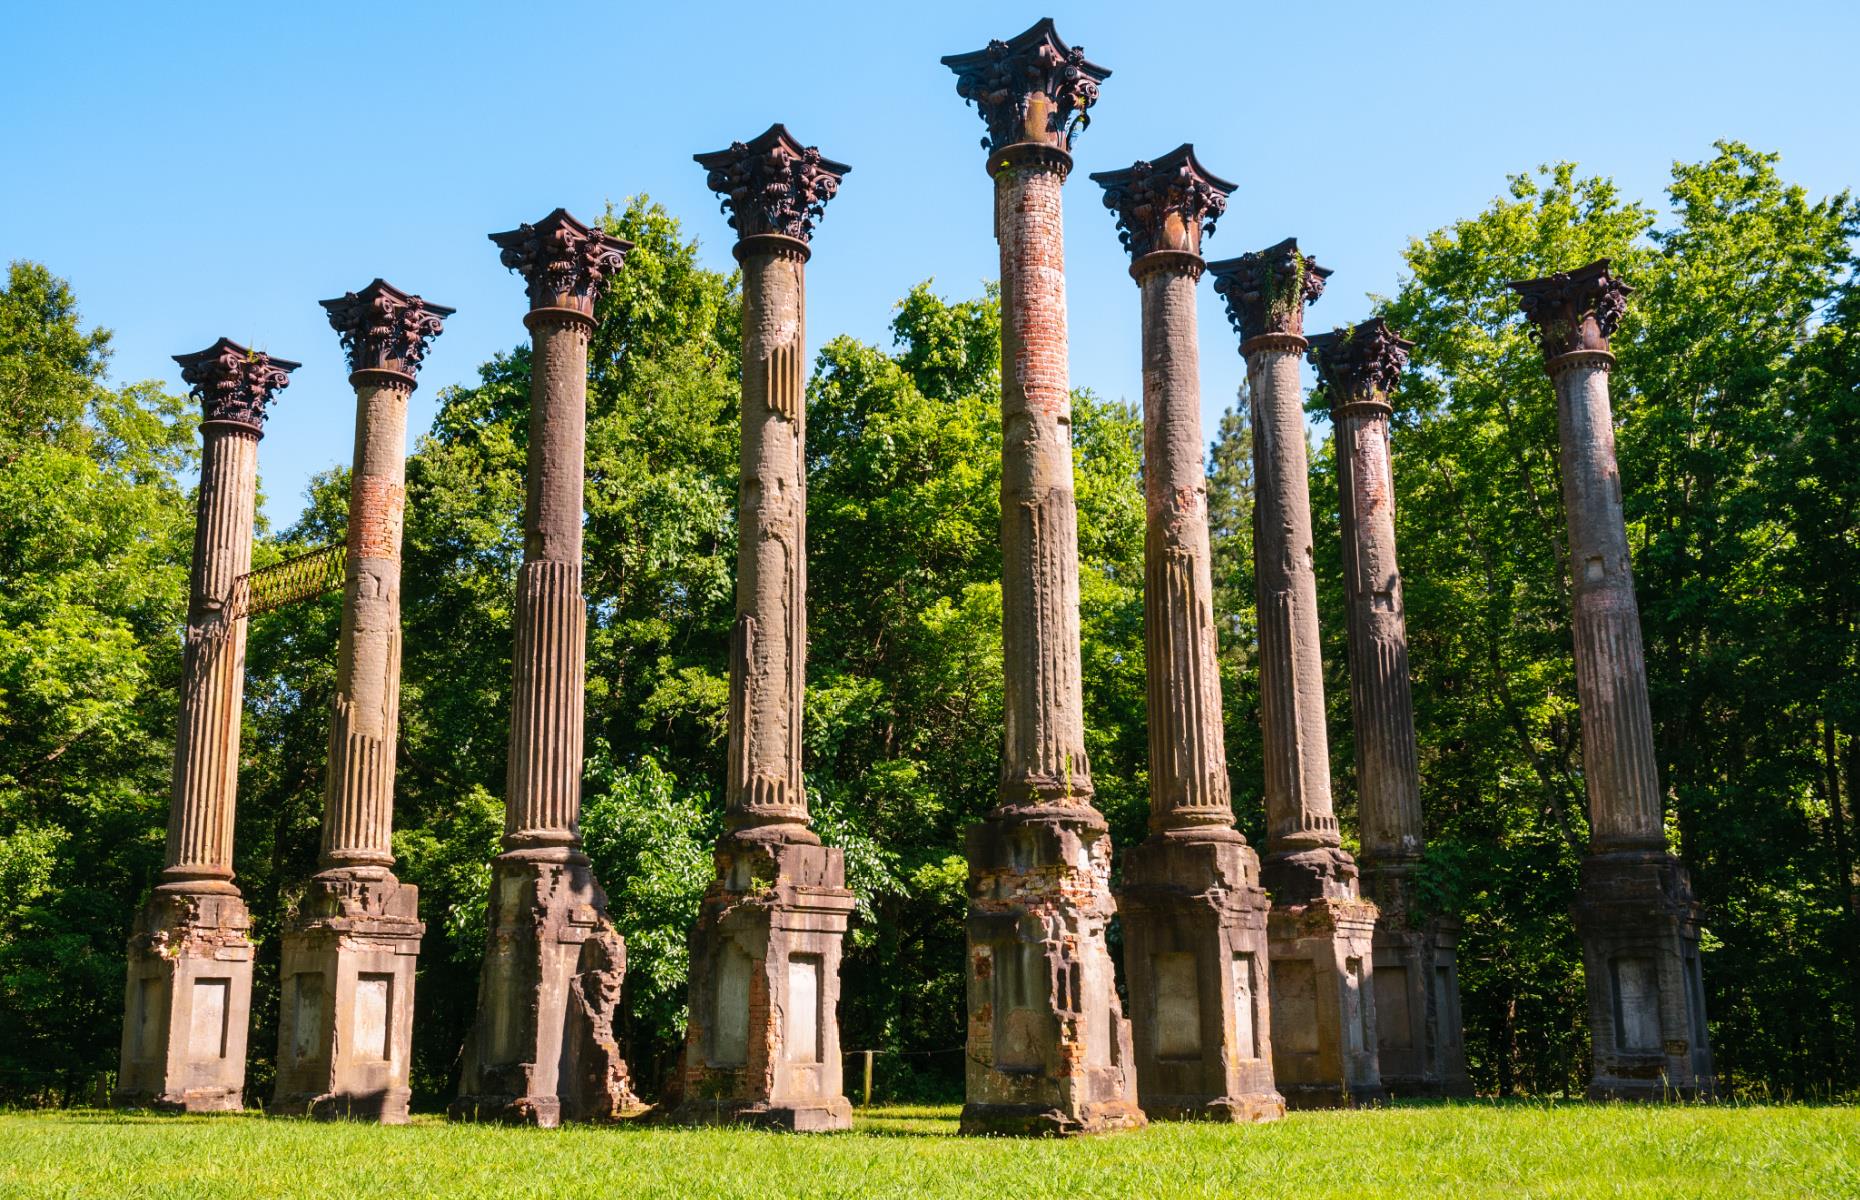 <p>The 29 columns at <a href="https://www.mdah.ms.gov/explore-mississippi/windsor-ruins">Windsor Ruins</a> look like they could date back to Roman times, but they’re actually the remains of a plantation that burned down in 1890. The original house was built in 1861 – it was one of the largest private homes in Mississippi and was also a station used by the Confederate Army during the Civil War. The columns have deteriorated over the years and stabilization works are currently underway to ensure that none of them topple over.</p>